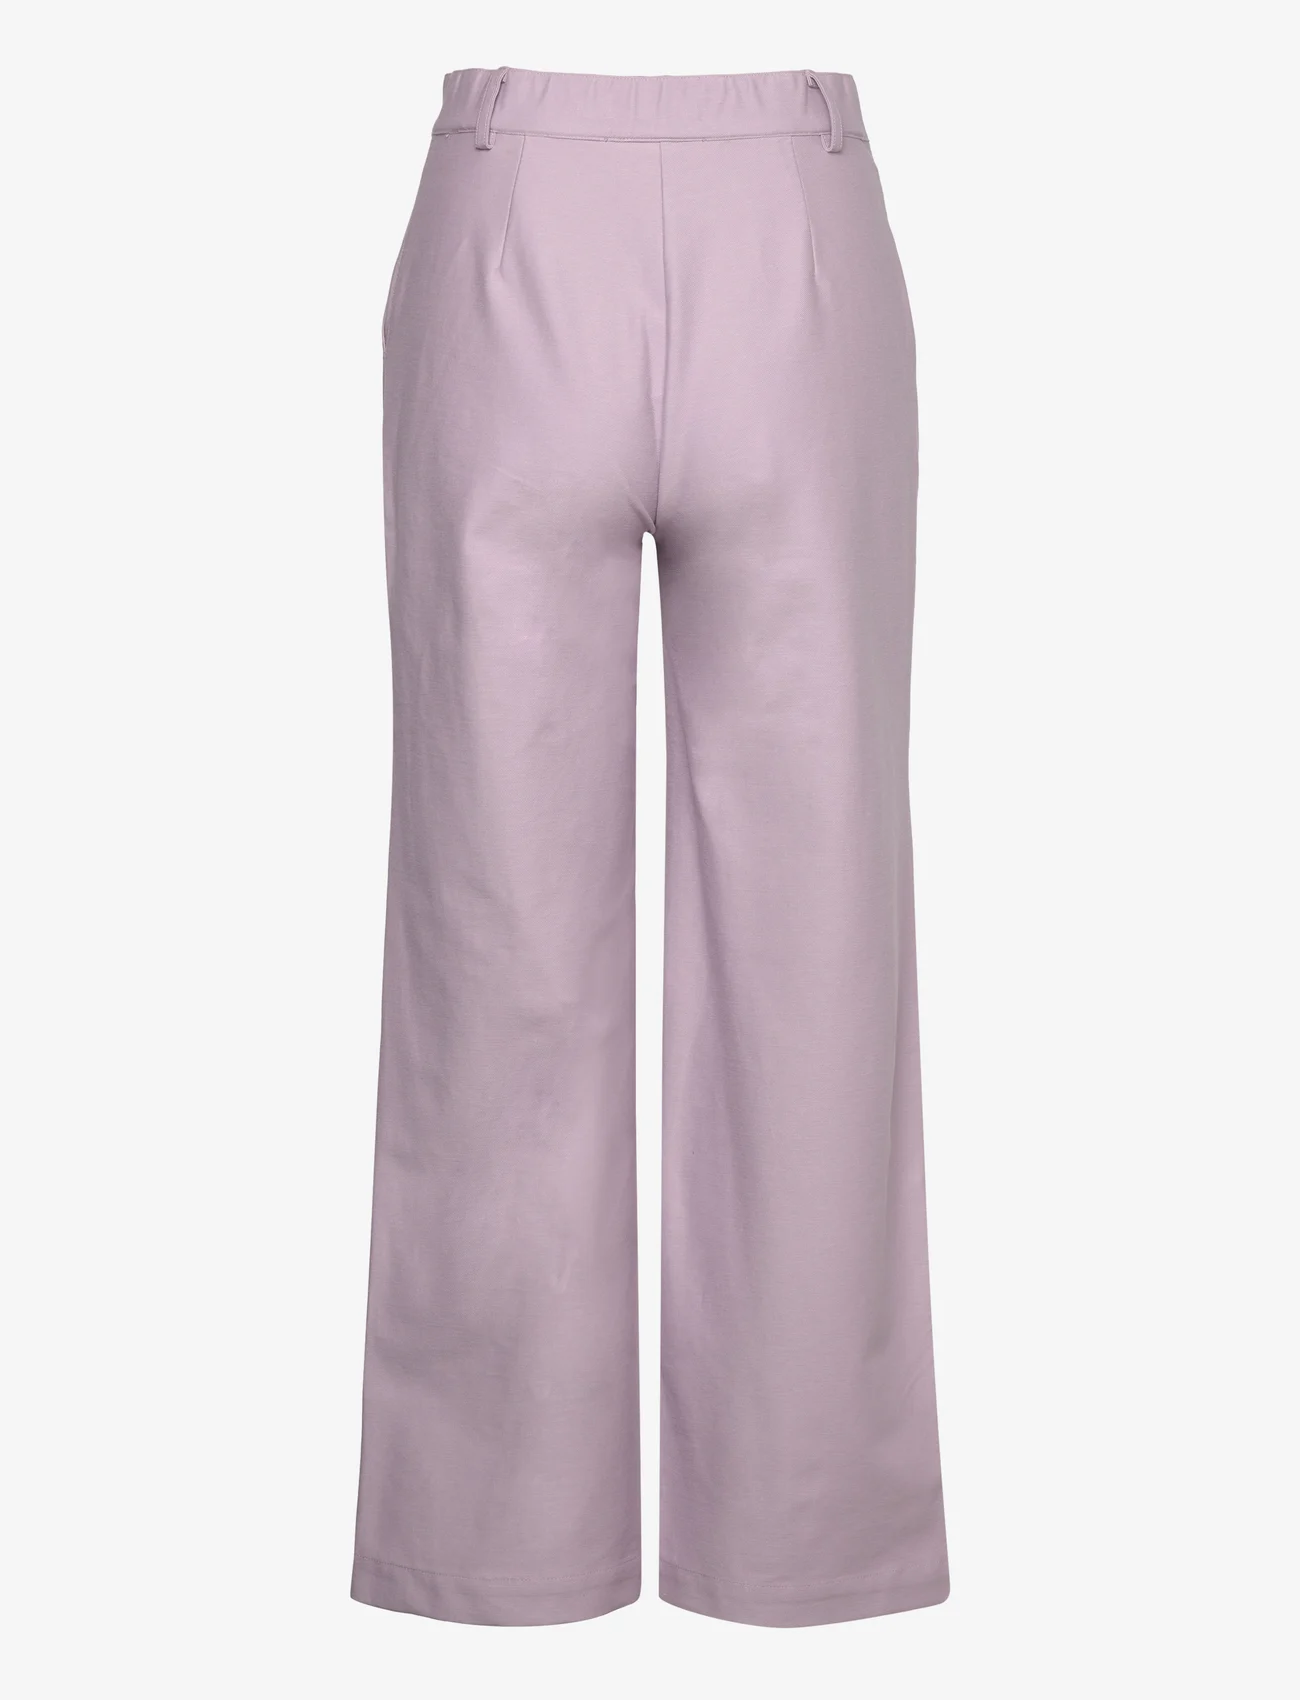 Max Mara Leisure - VASAIO - party wear at outlet prices - lilac - 1